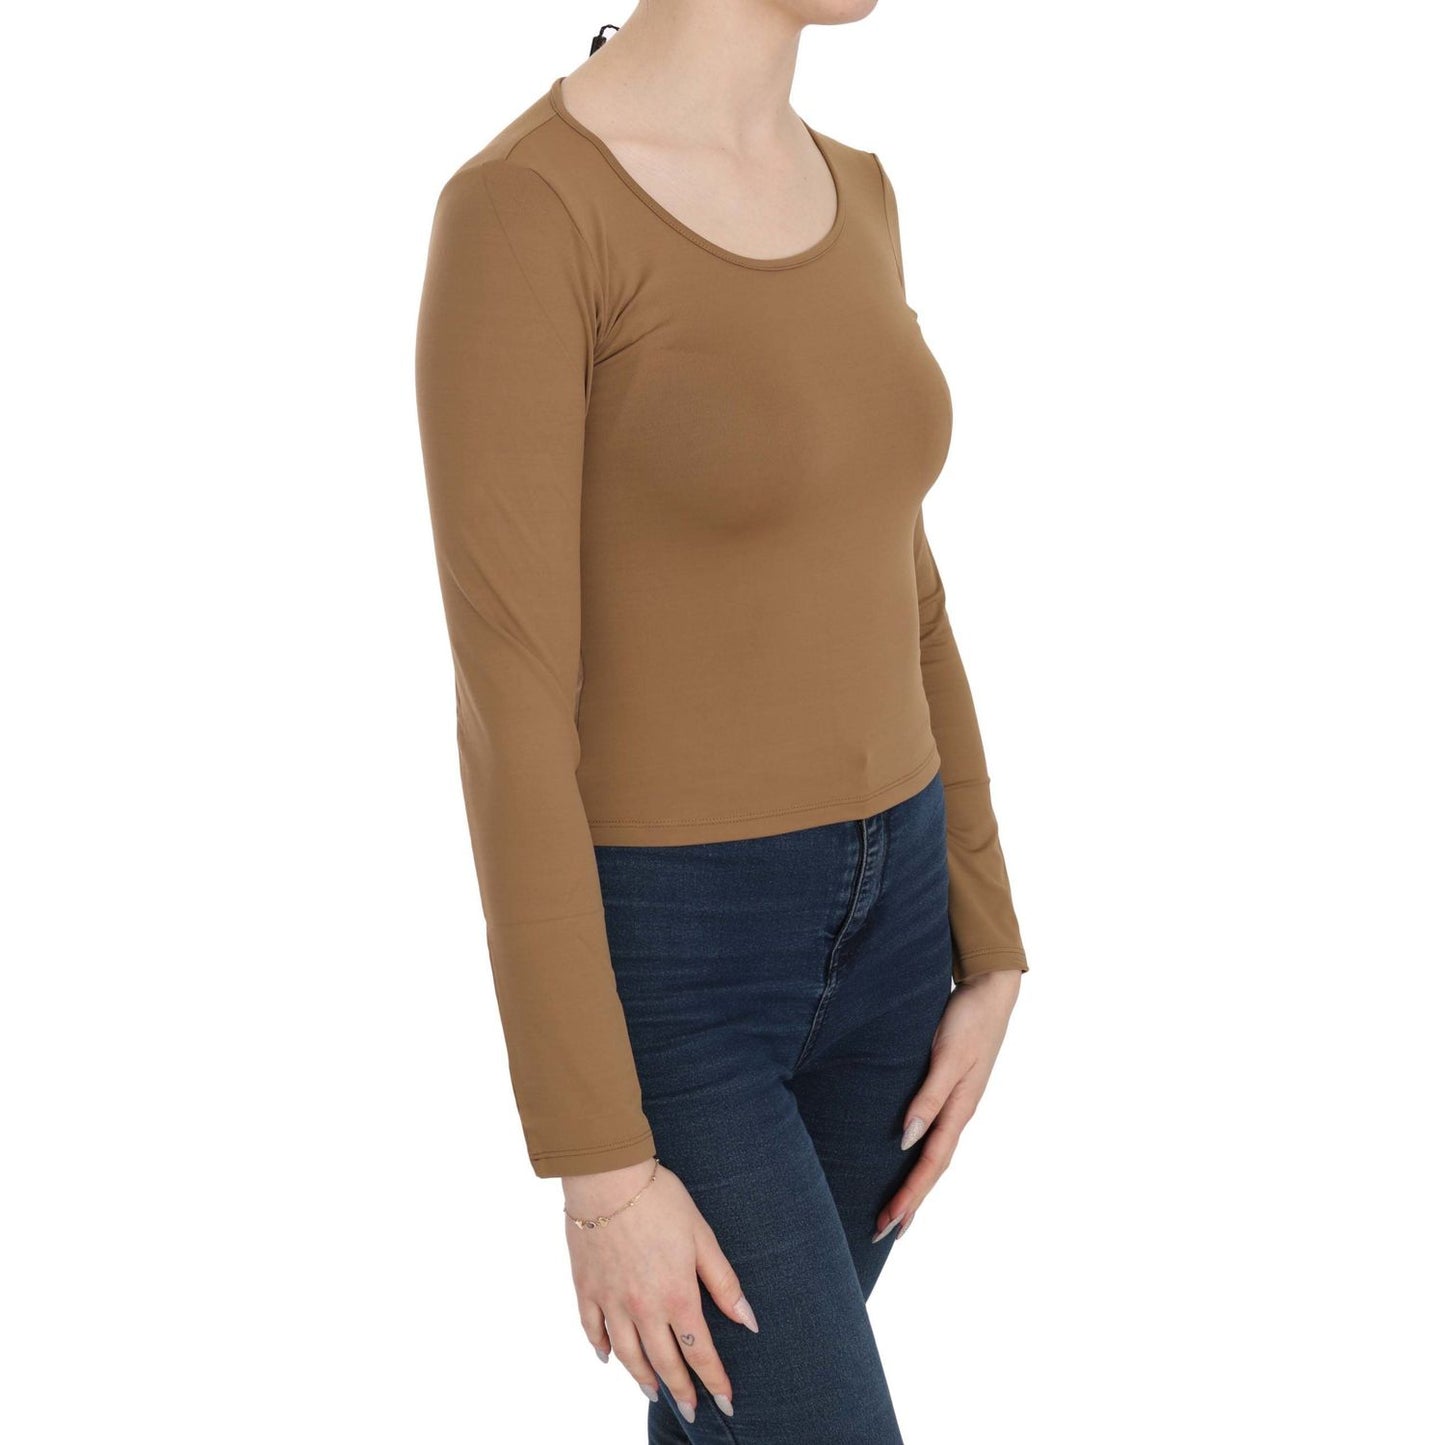 GF Ferre | Brown Long Round Neck Sleeve Fitted Shirt Tops Blouse | McRichard Designer Brands